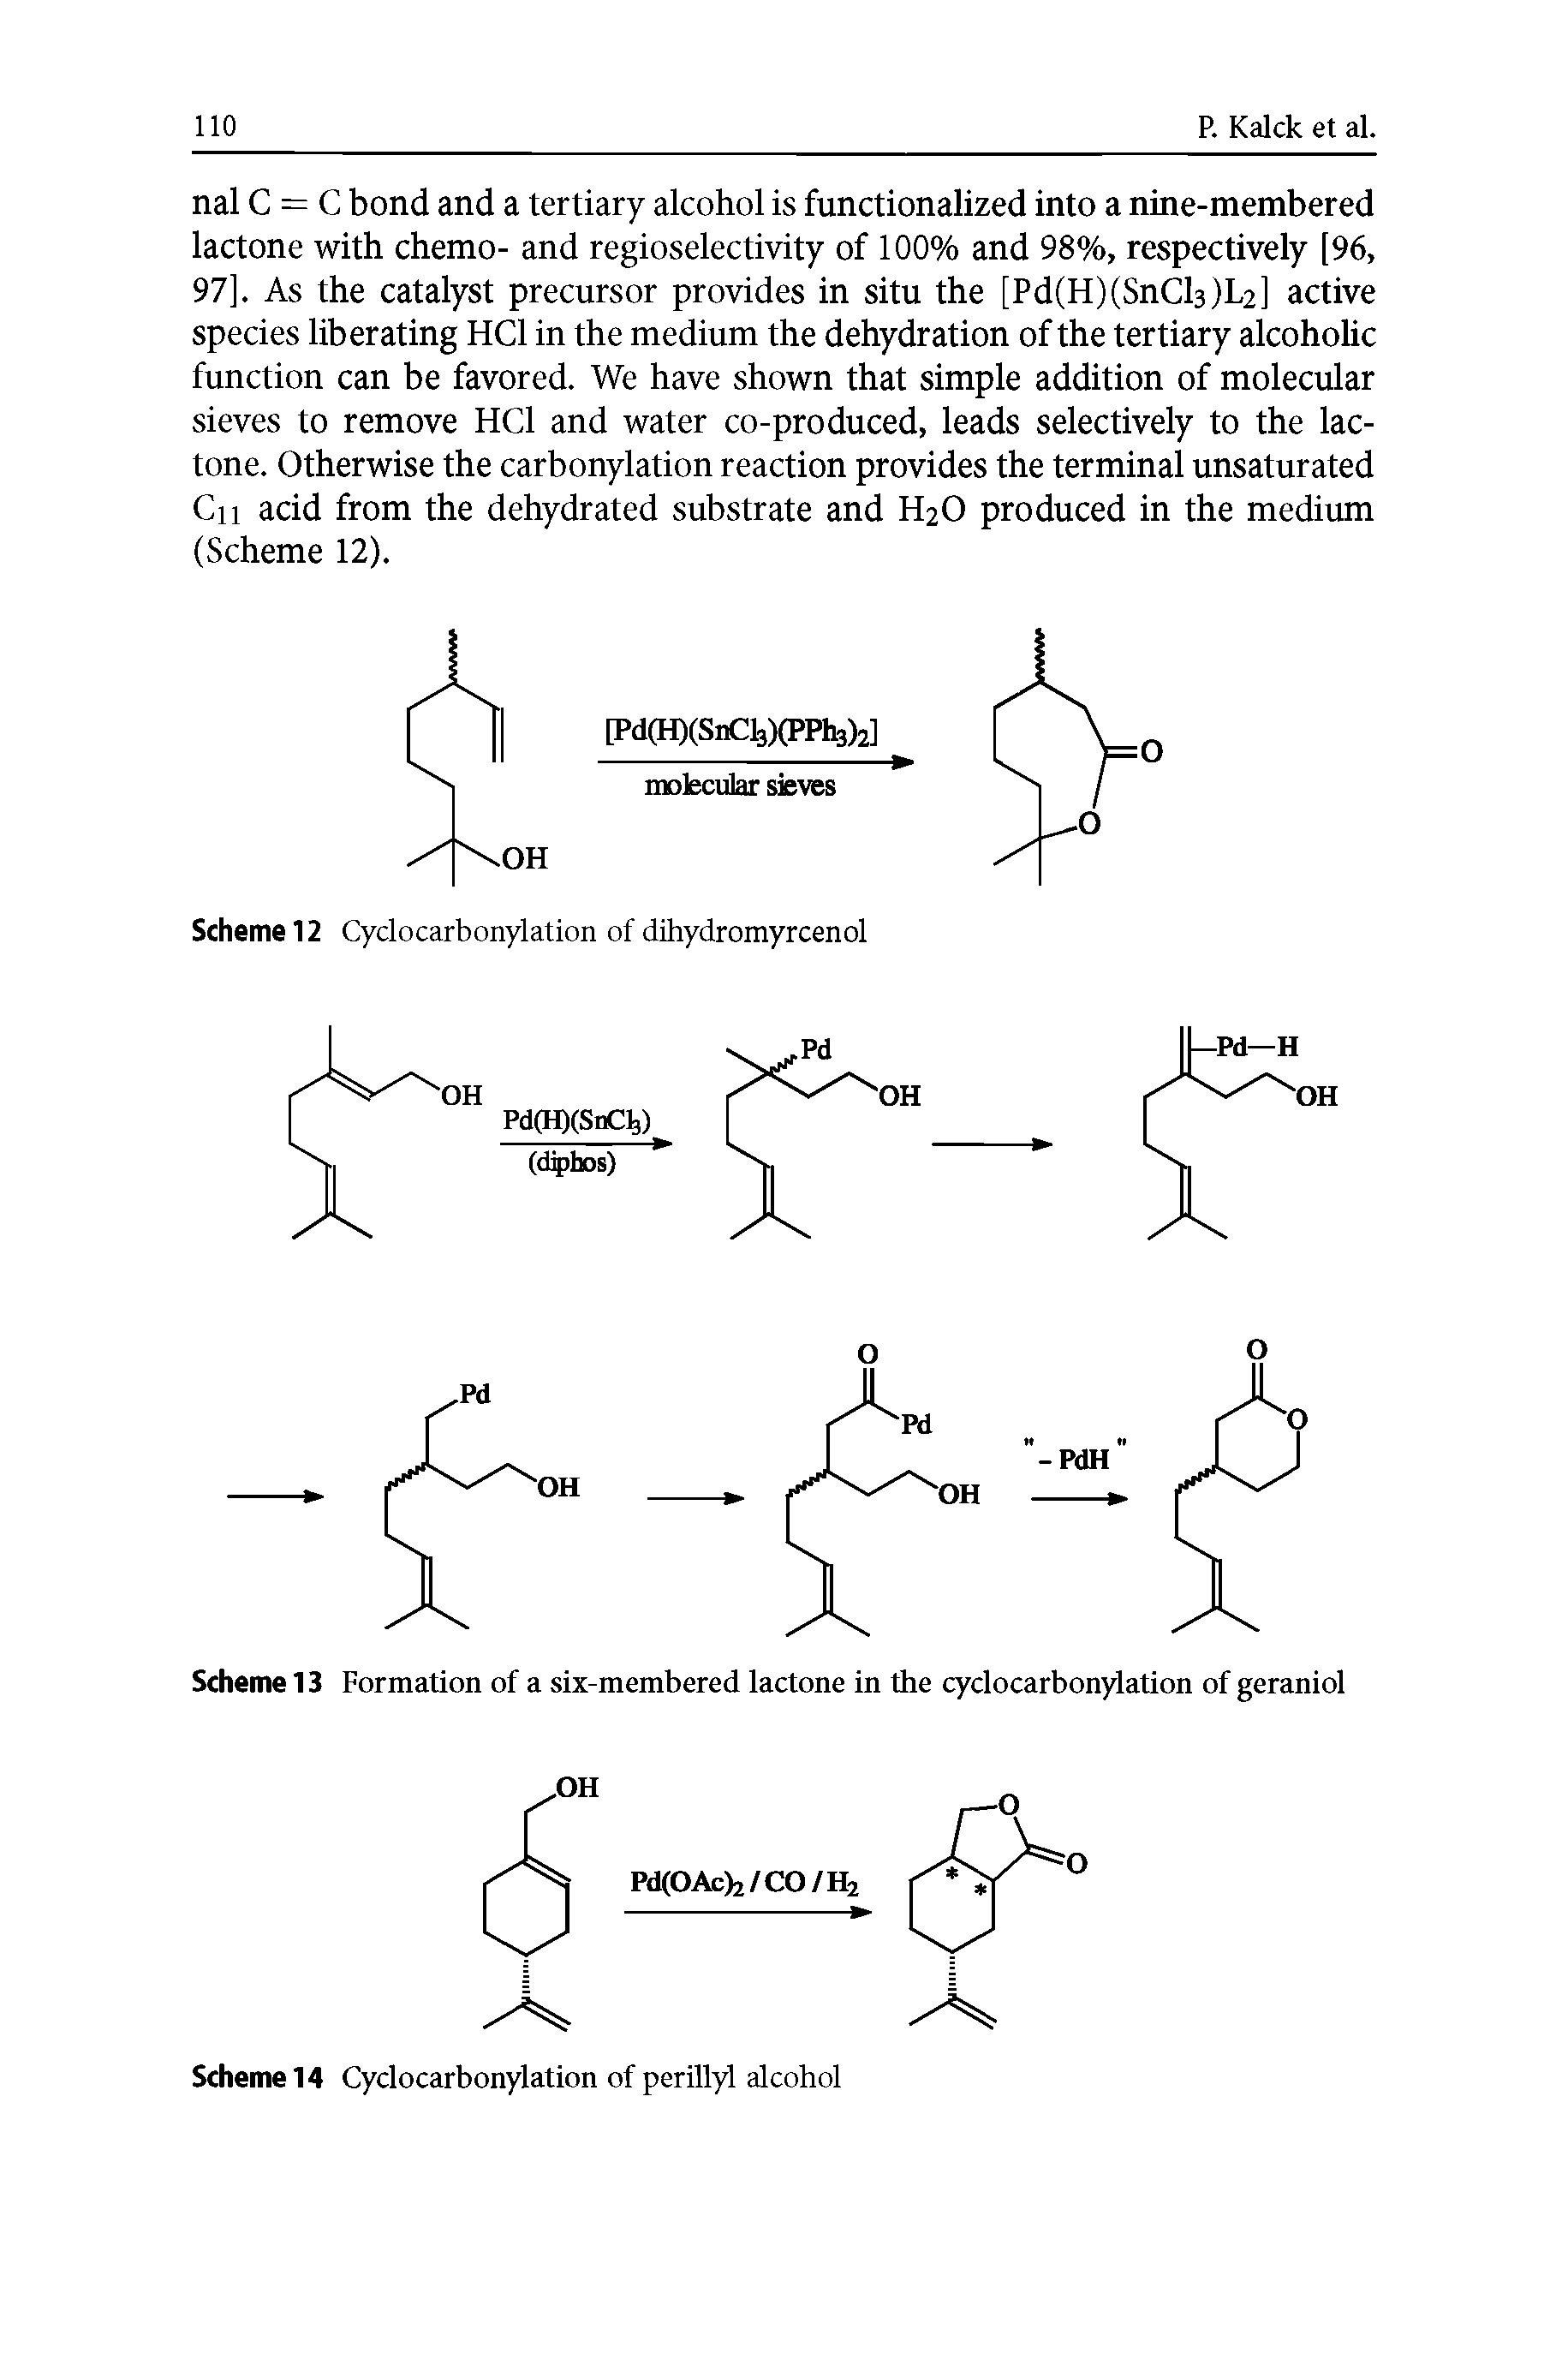 Scheme 13 Formation of a six-membered lactone in the cyclocarbonylation of geraniol...